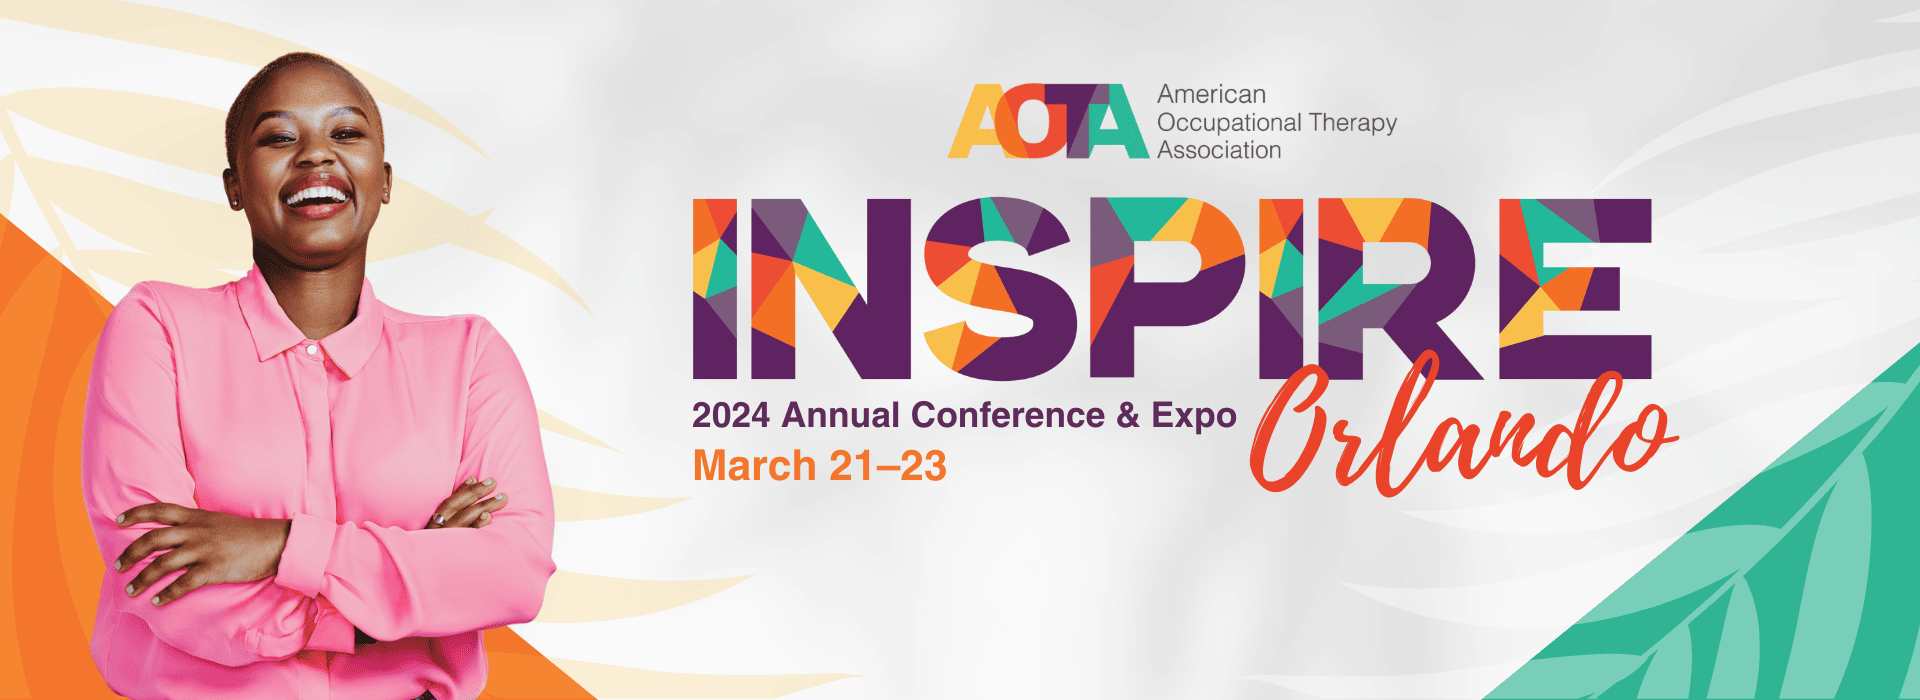 AOTA INSPIRE 2024 Annual Conference & Expo